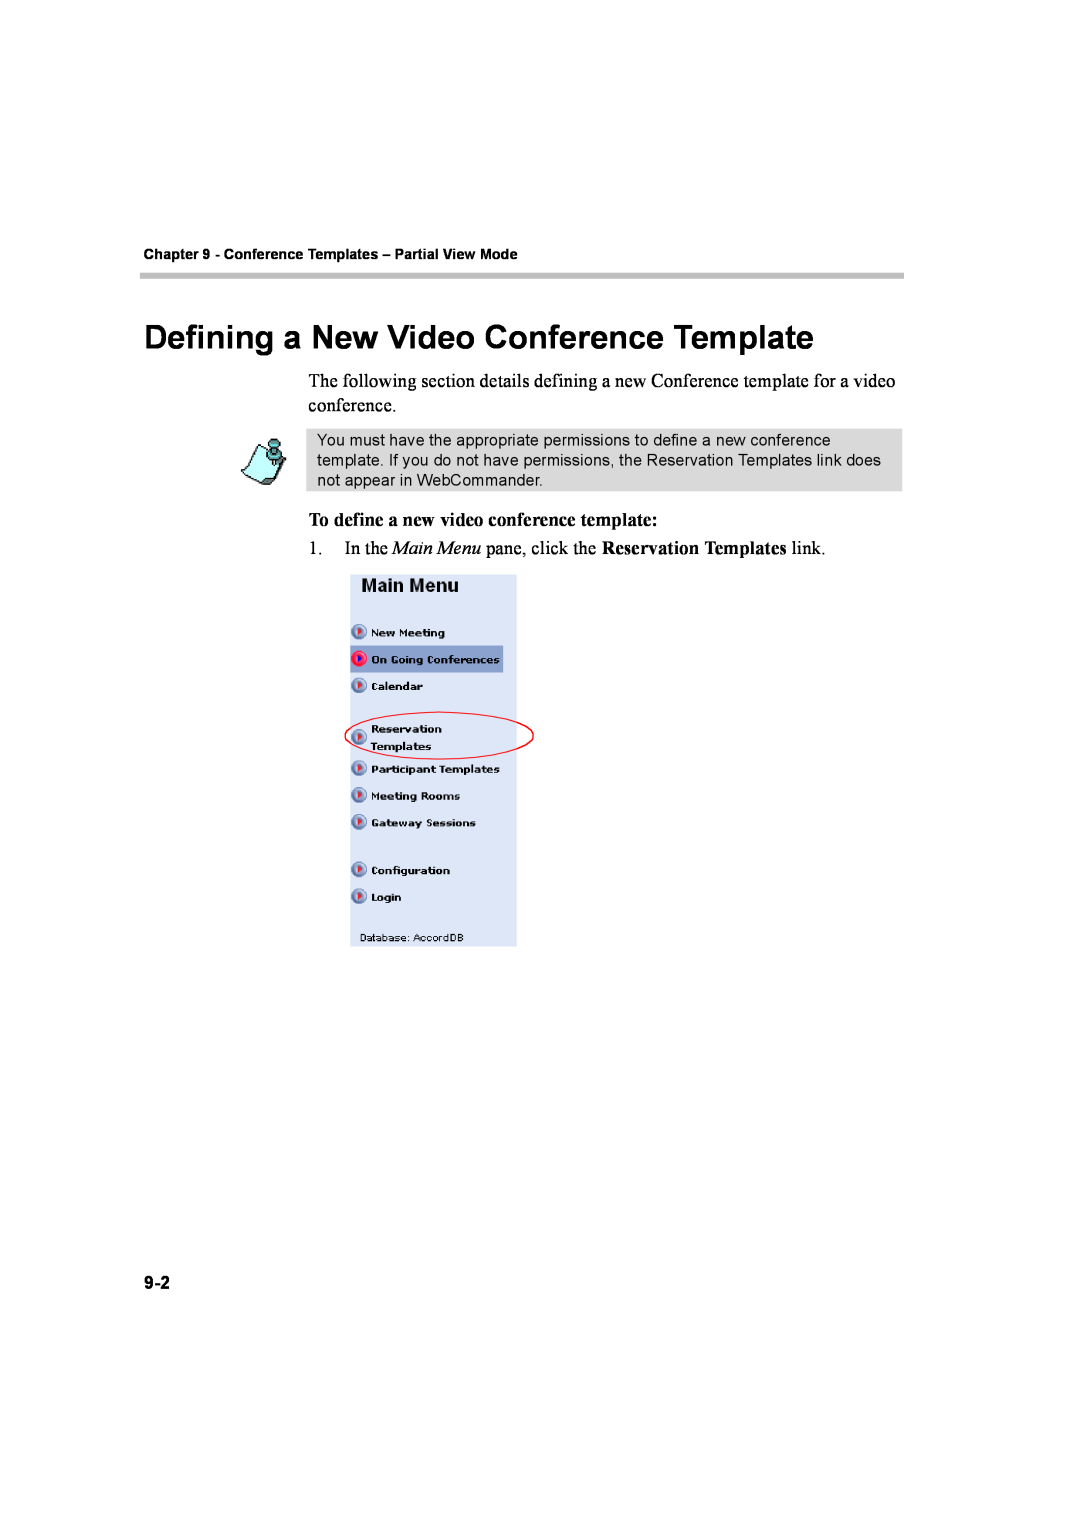 Polycom 8 manual Defining a New Video Conference Template, To define a new video conference template 